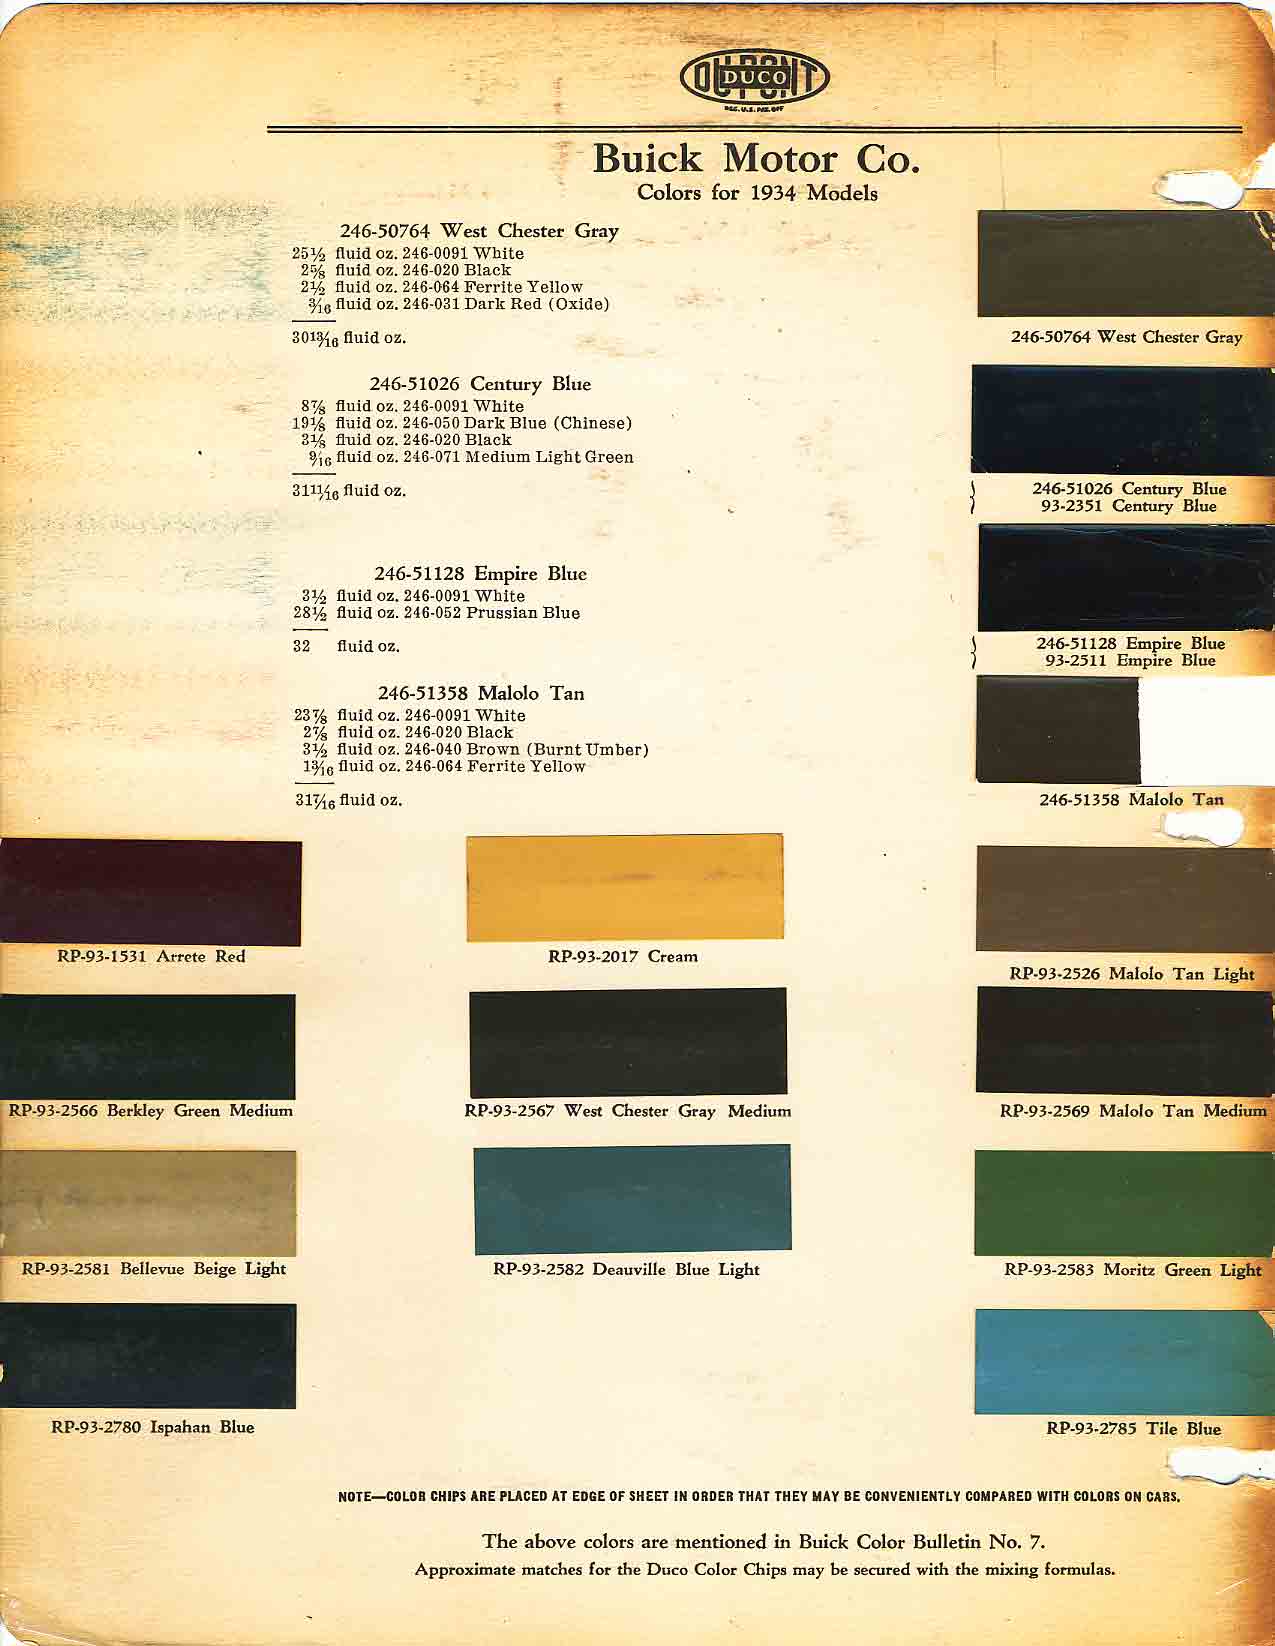 Colors and codes used on Buick Vehicles in 1934